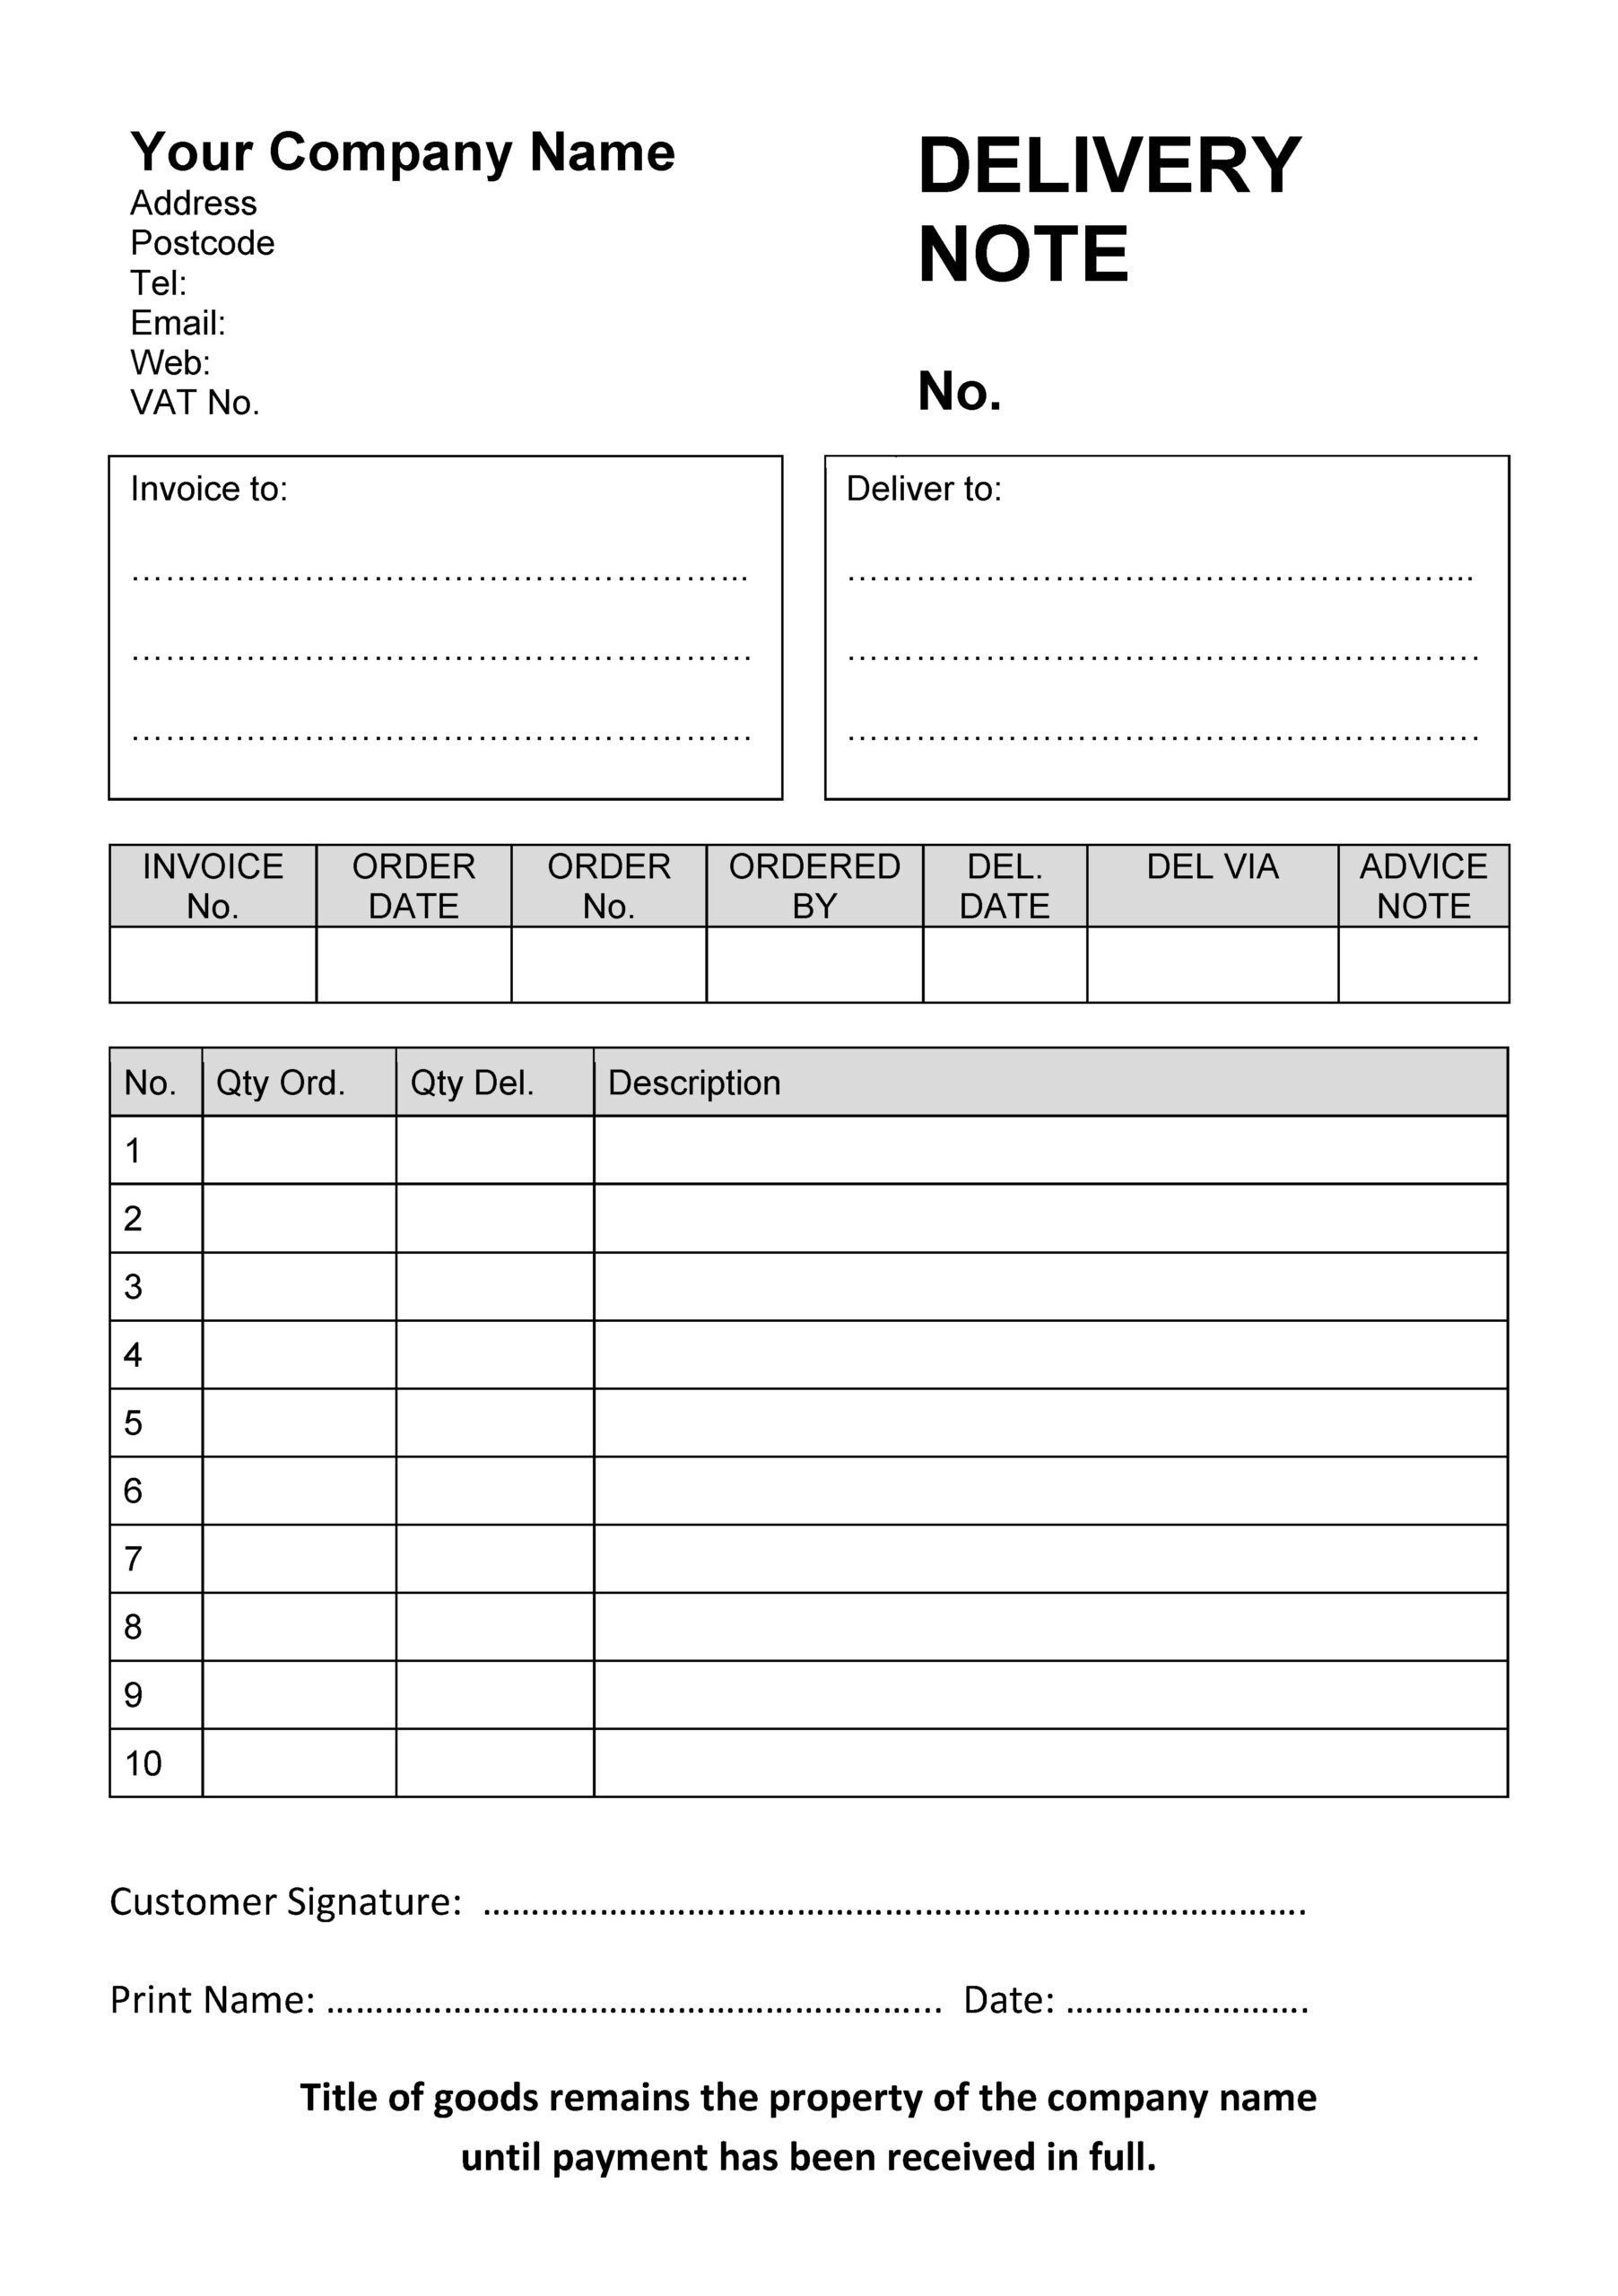 Delivery Note Template Excel | Qualads